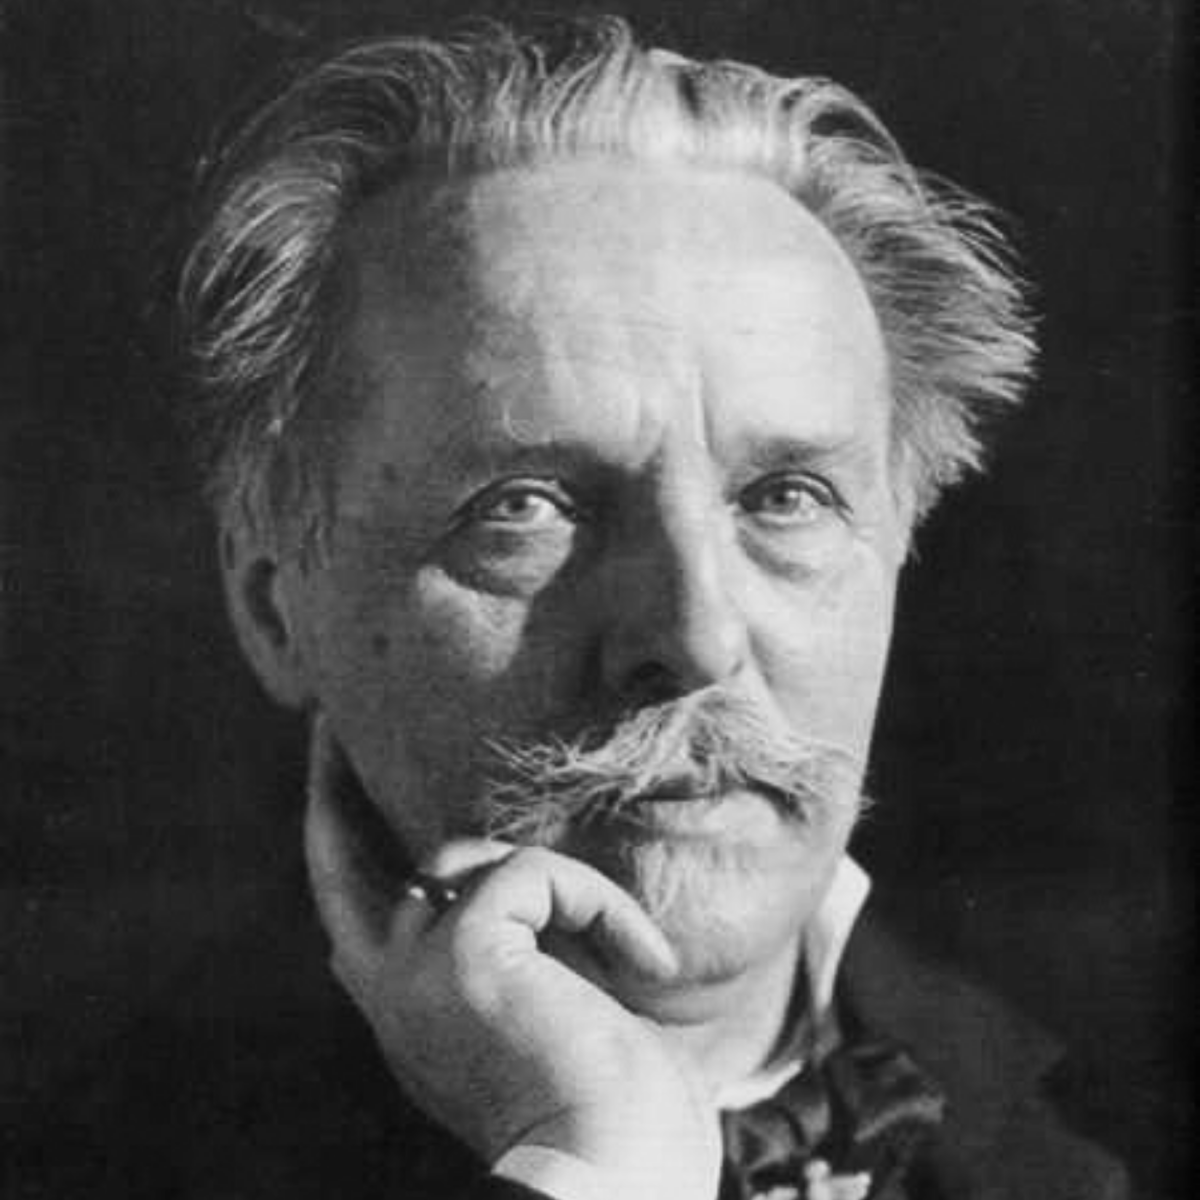 Karl May: From Con Man to Successful Author